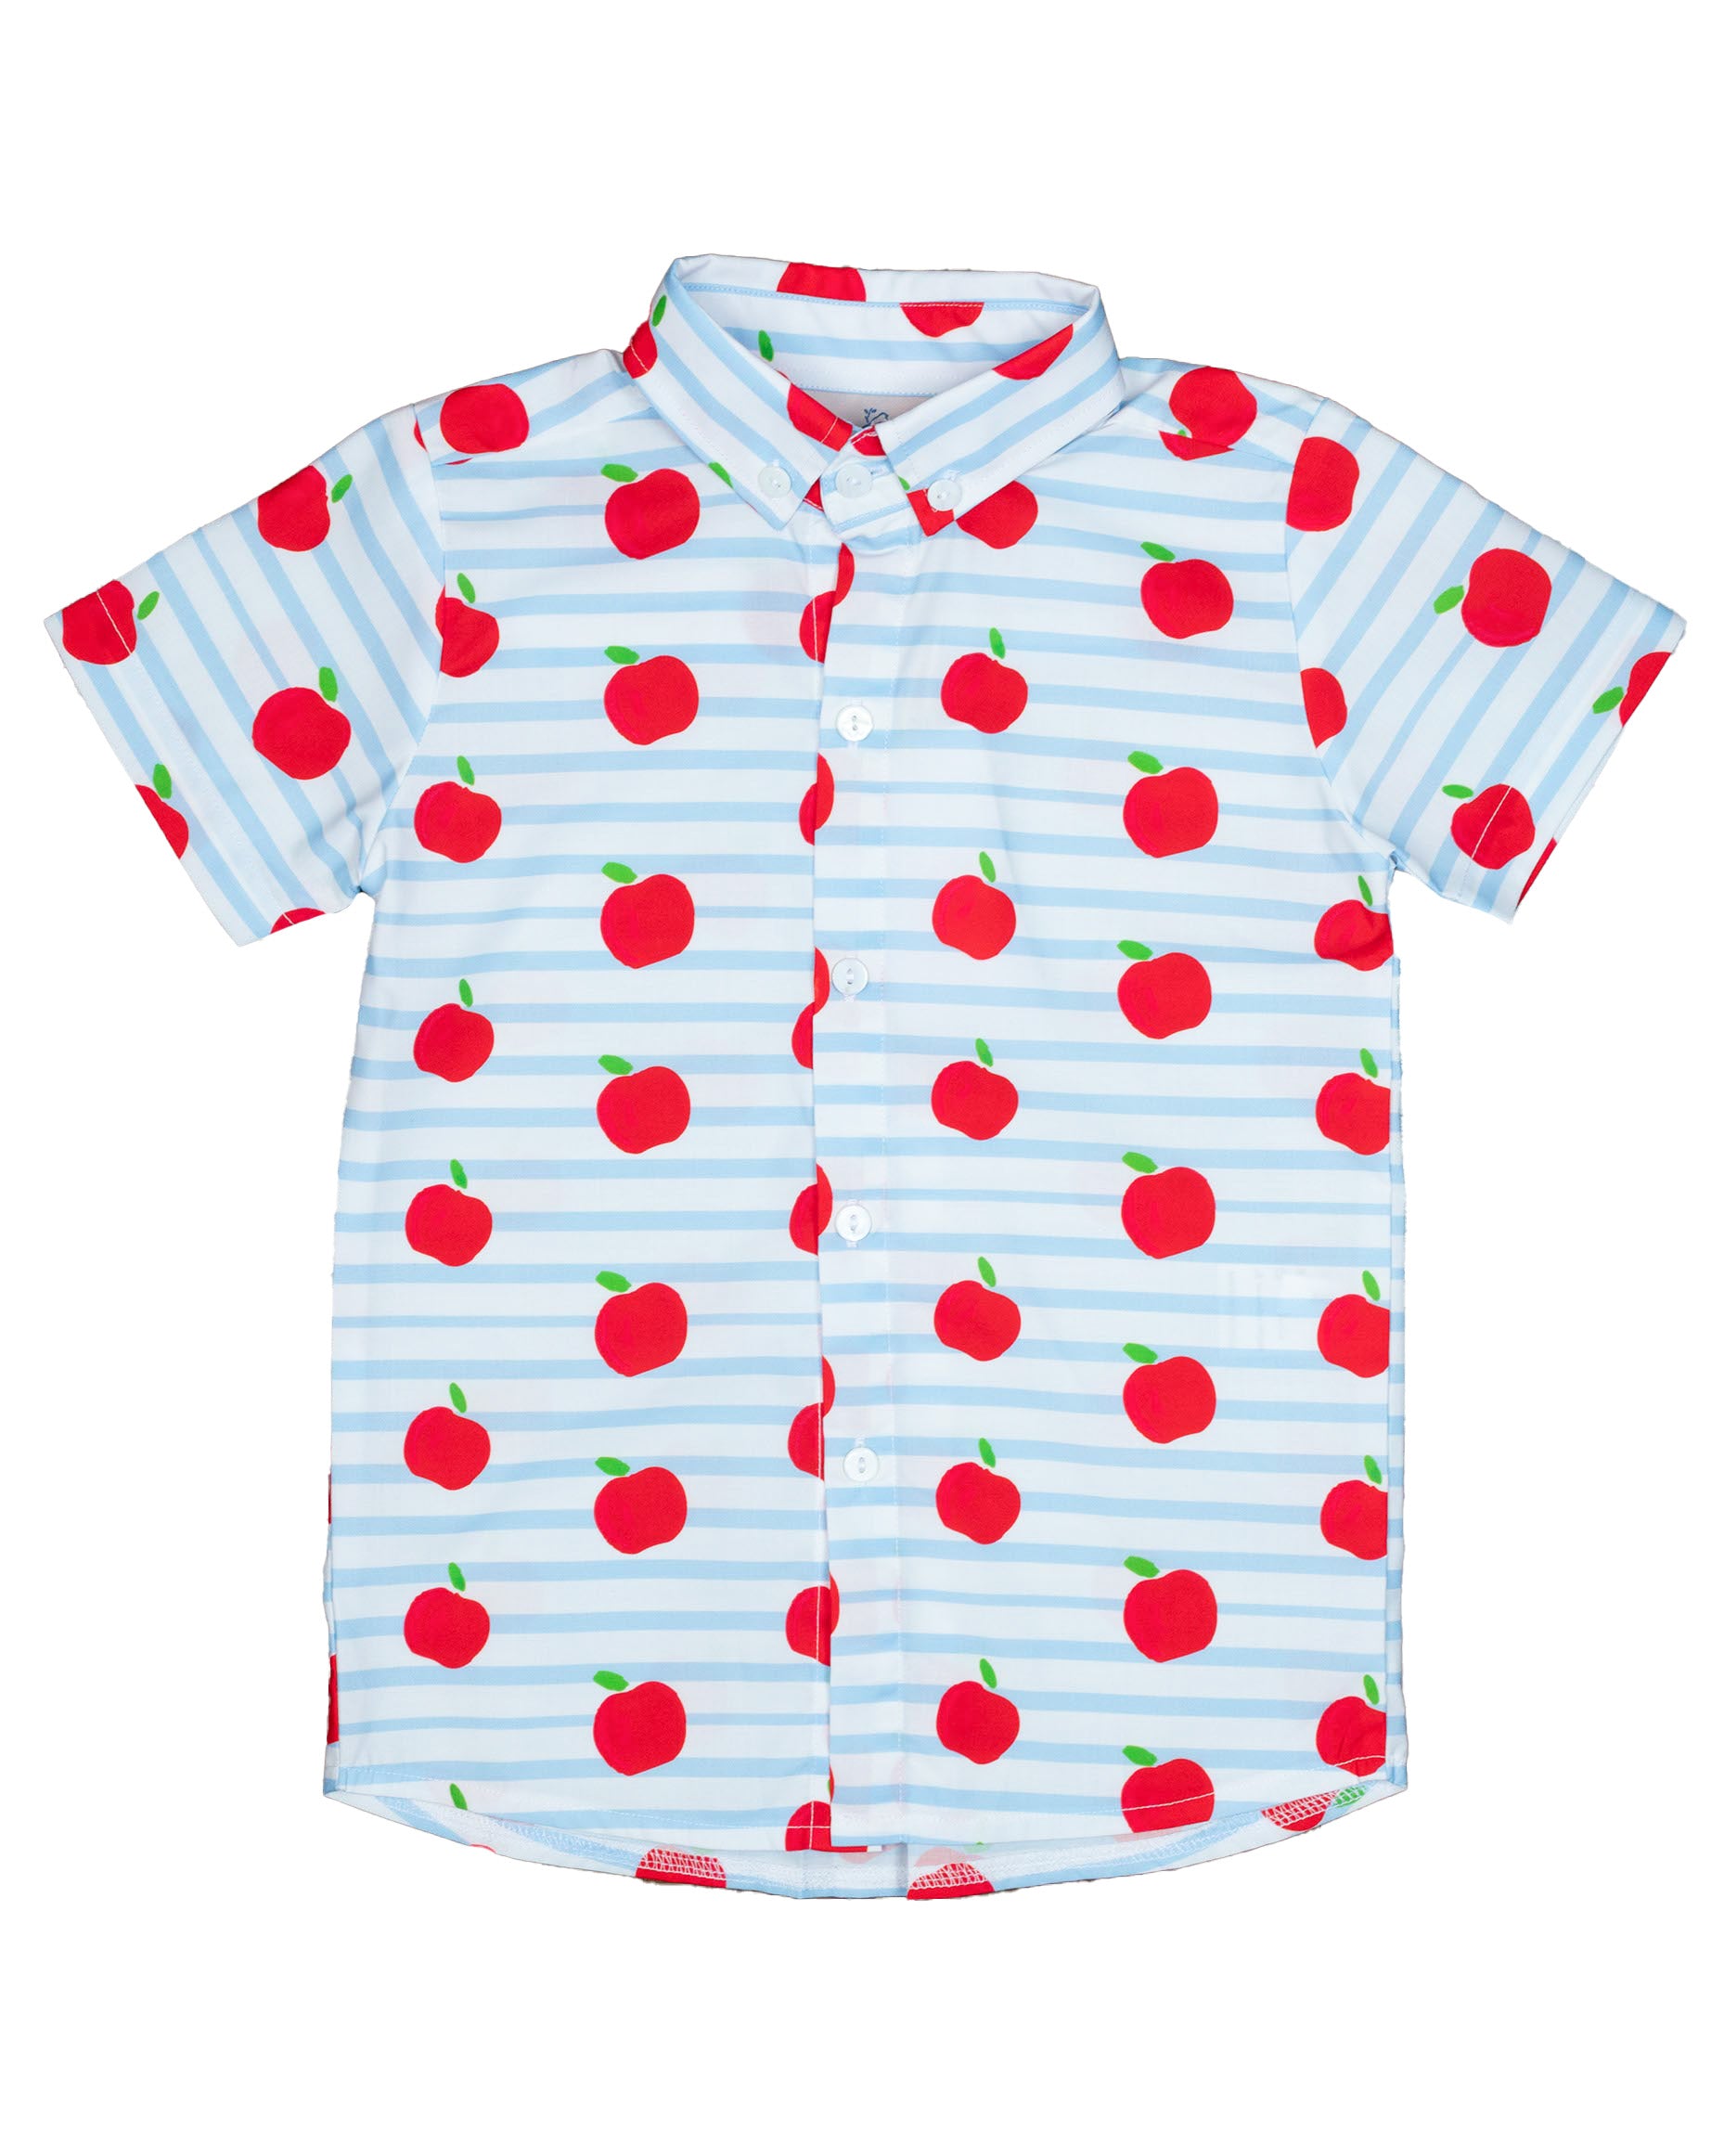 Apples and Stripes Boys Button Down Shirt- FINAL SALE